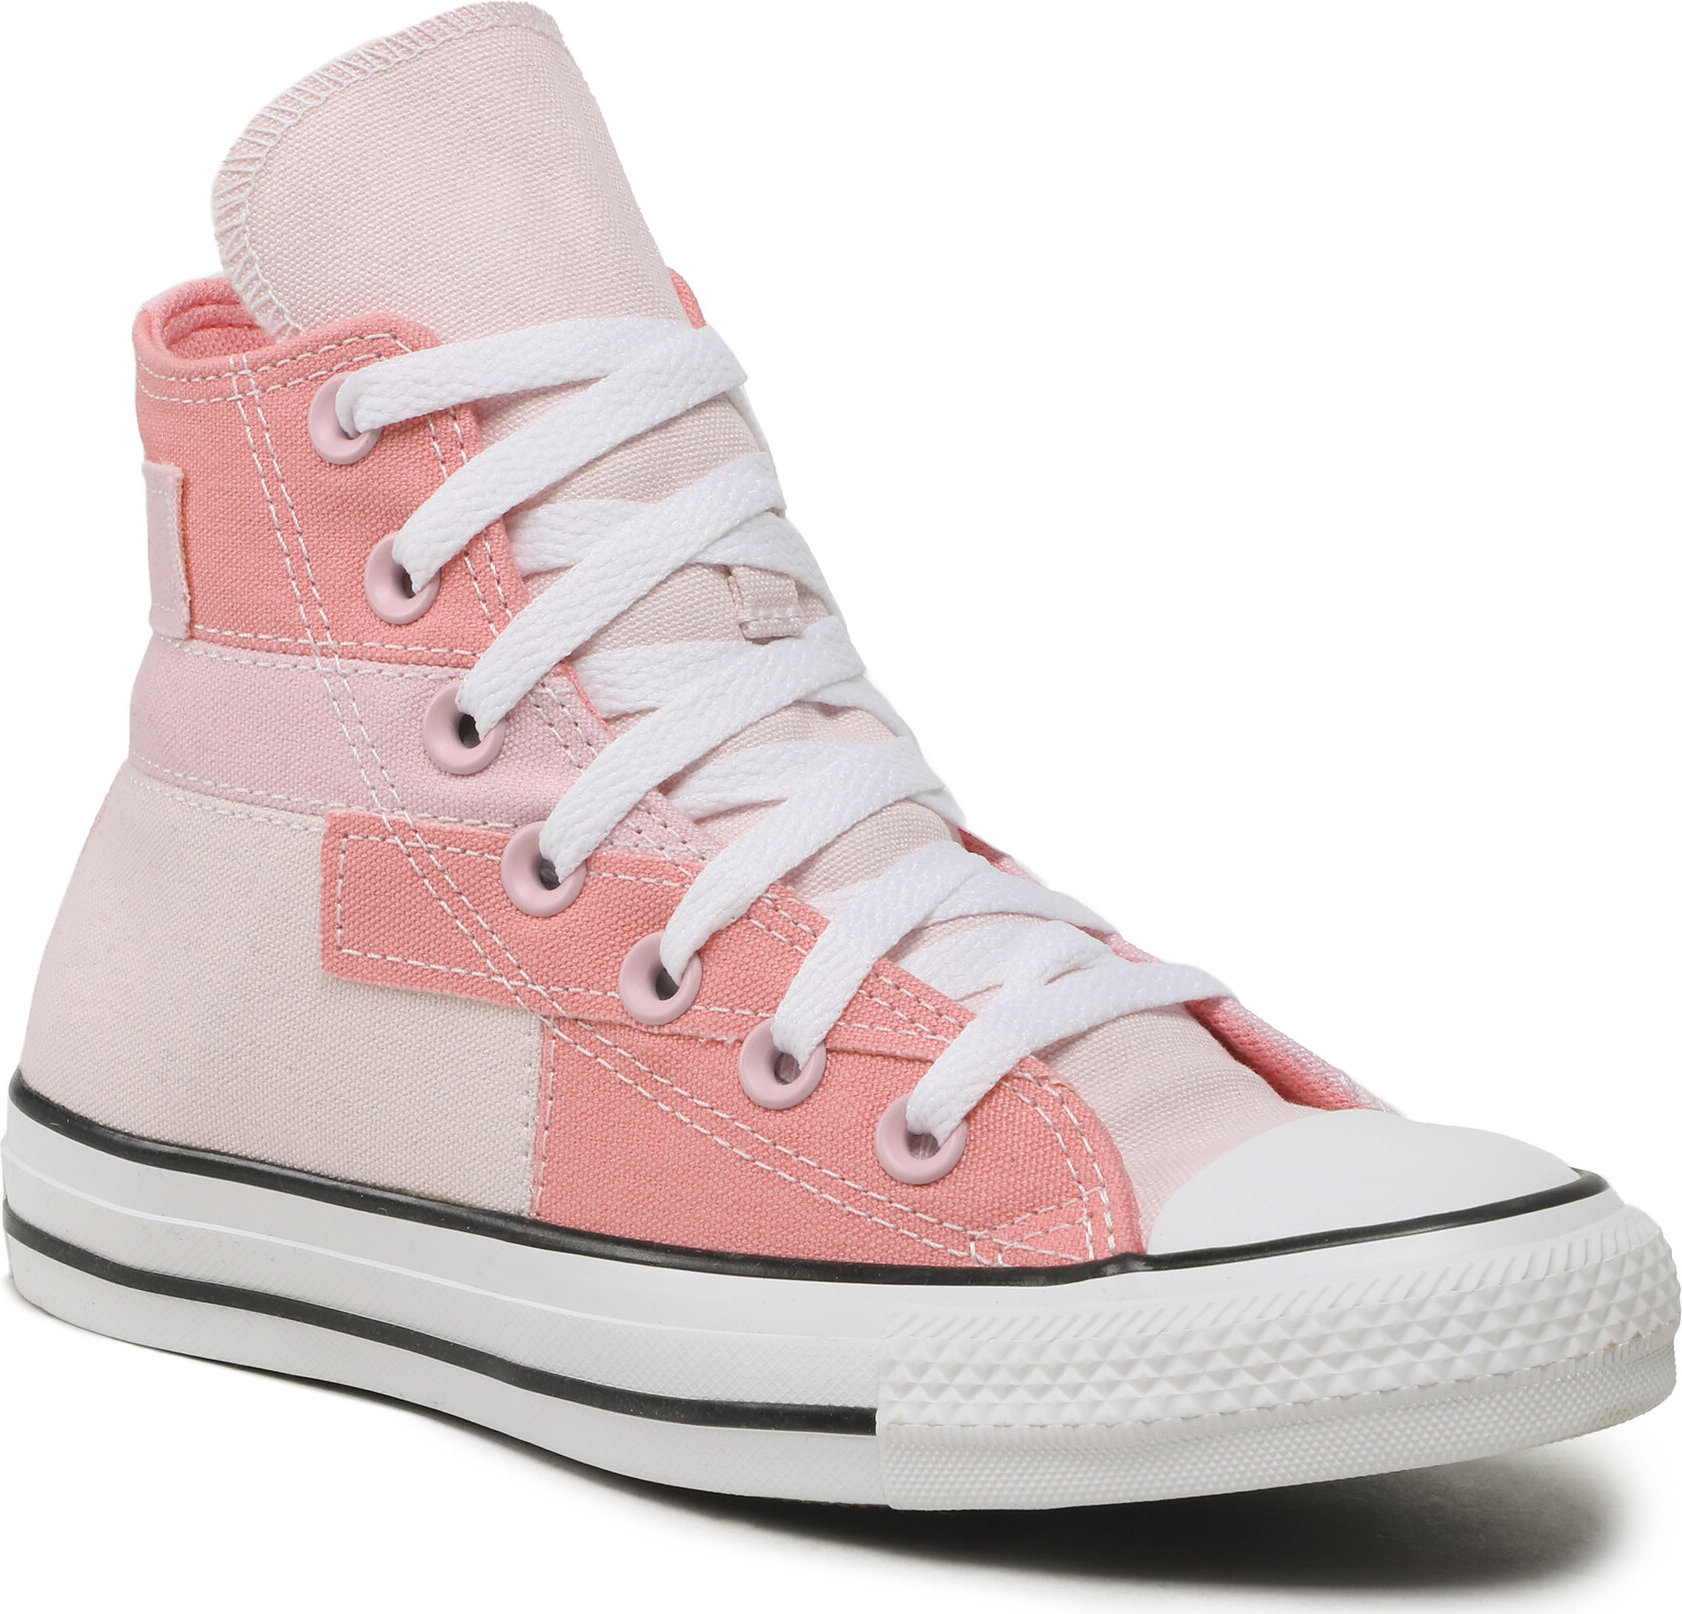 Plátenky Converse Chuck Taylor All Star Patchwork A06024C White/Pink